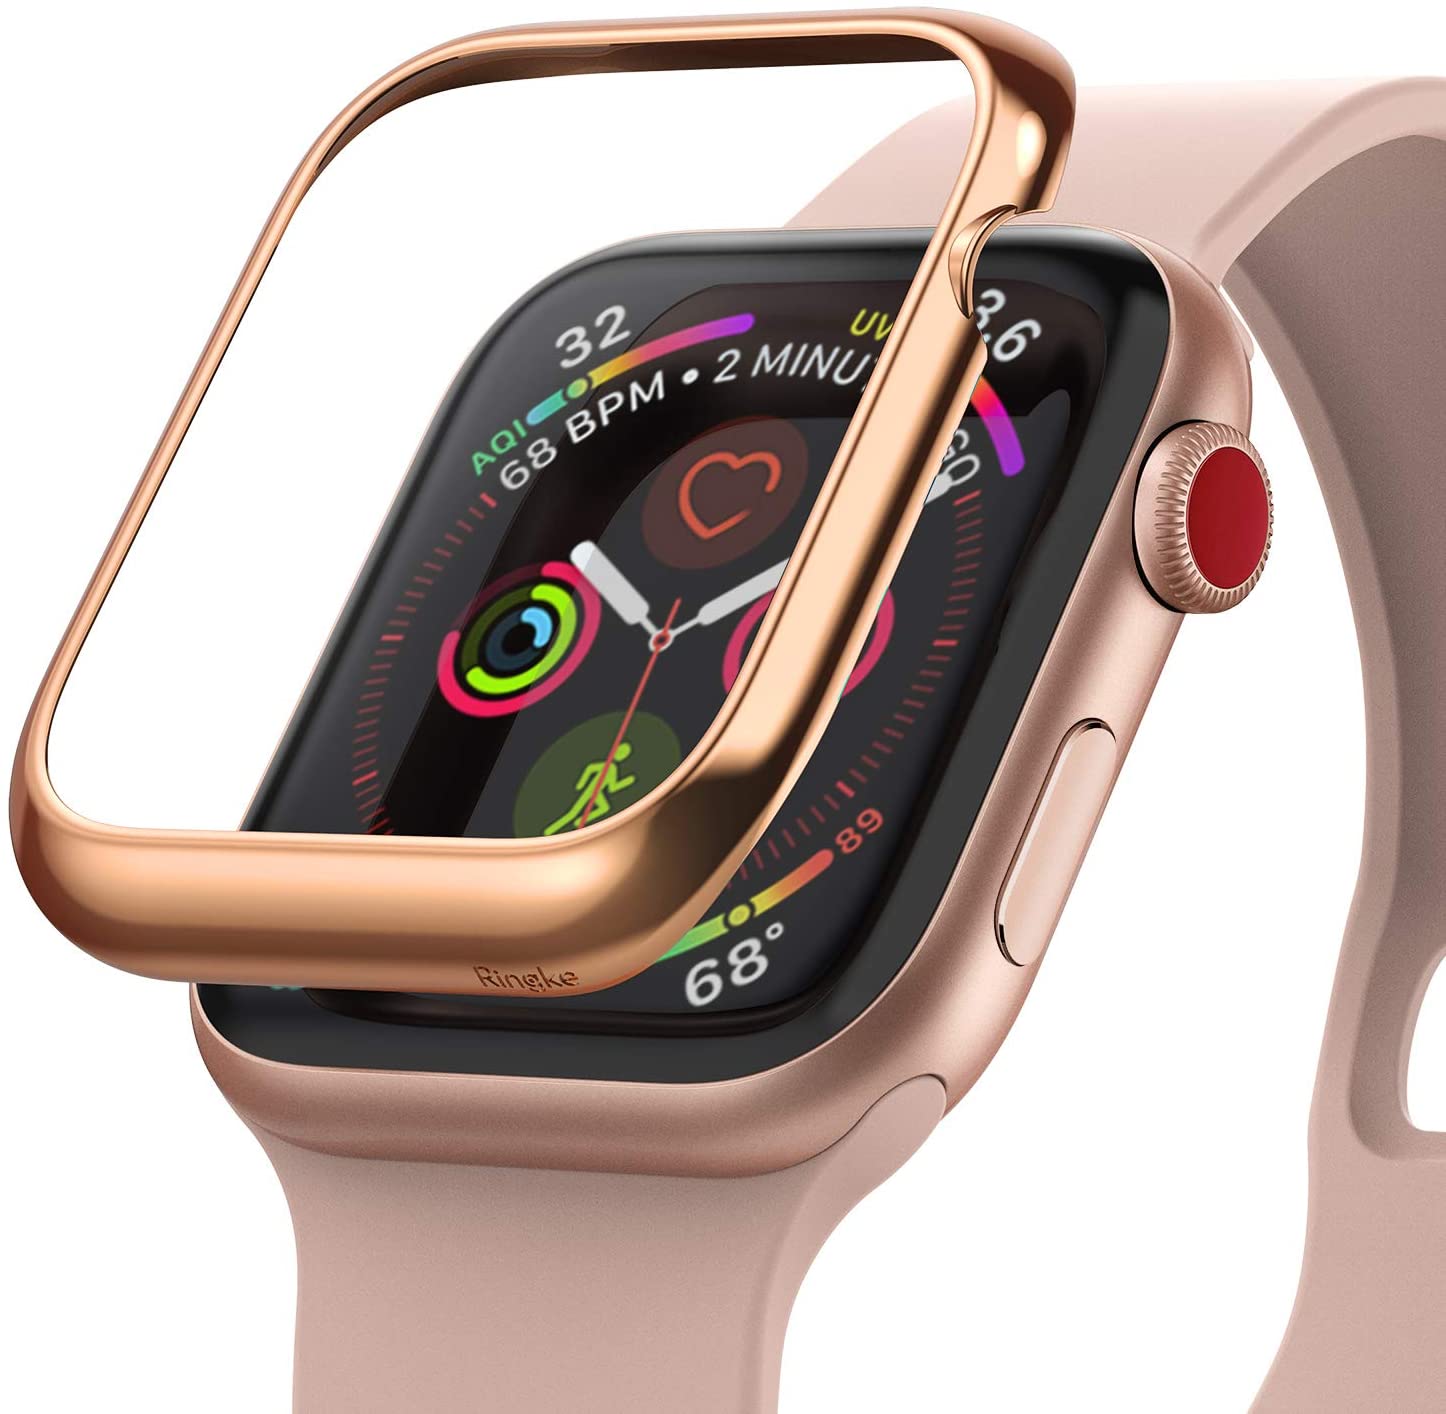 Bezel Styling Case Designed for Apple Watch Series 3 - e4cents